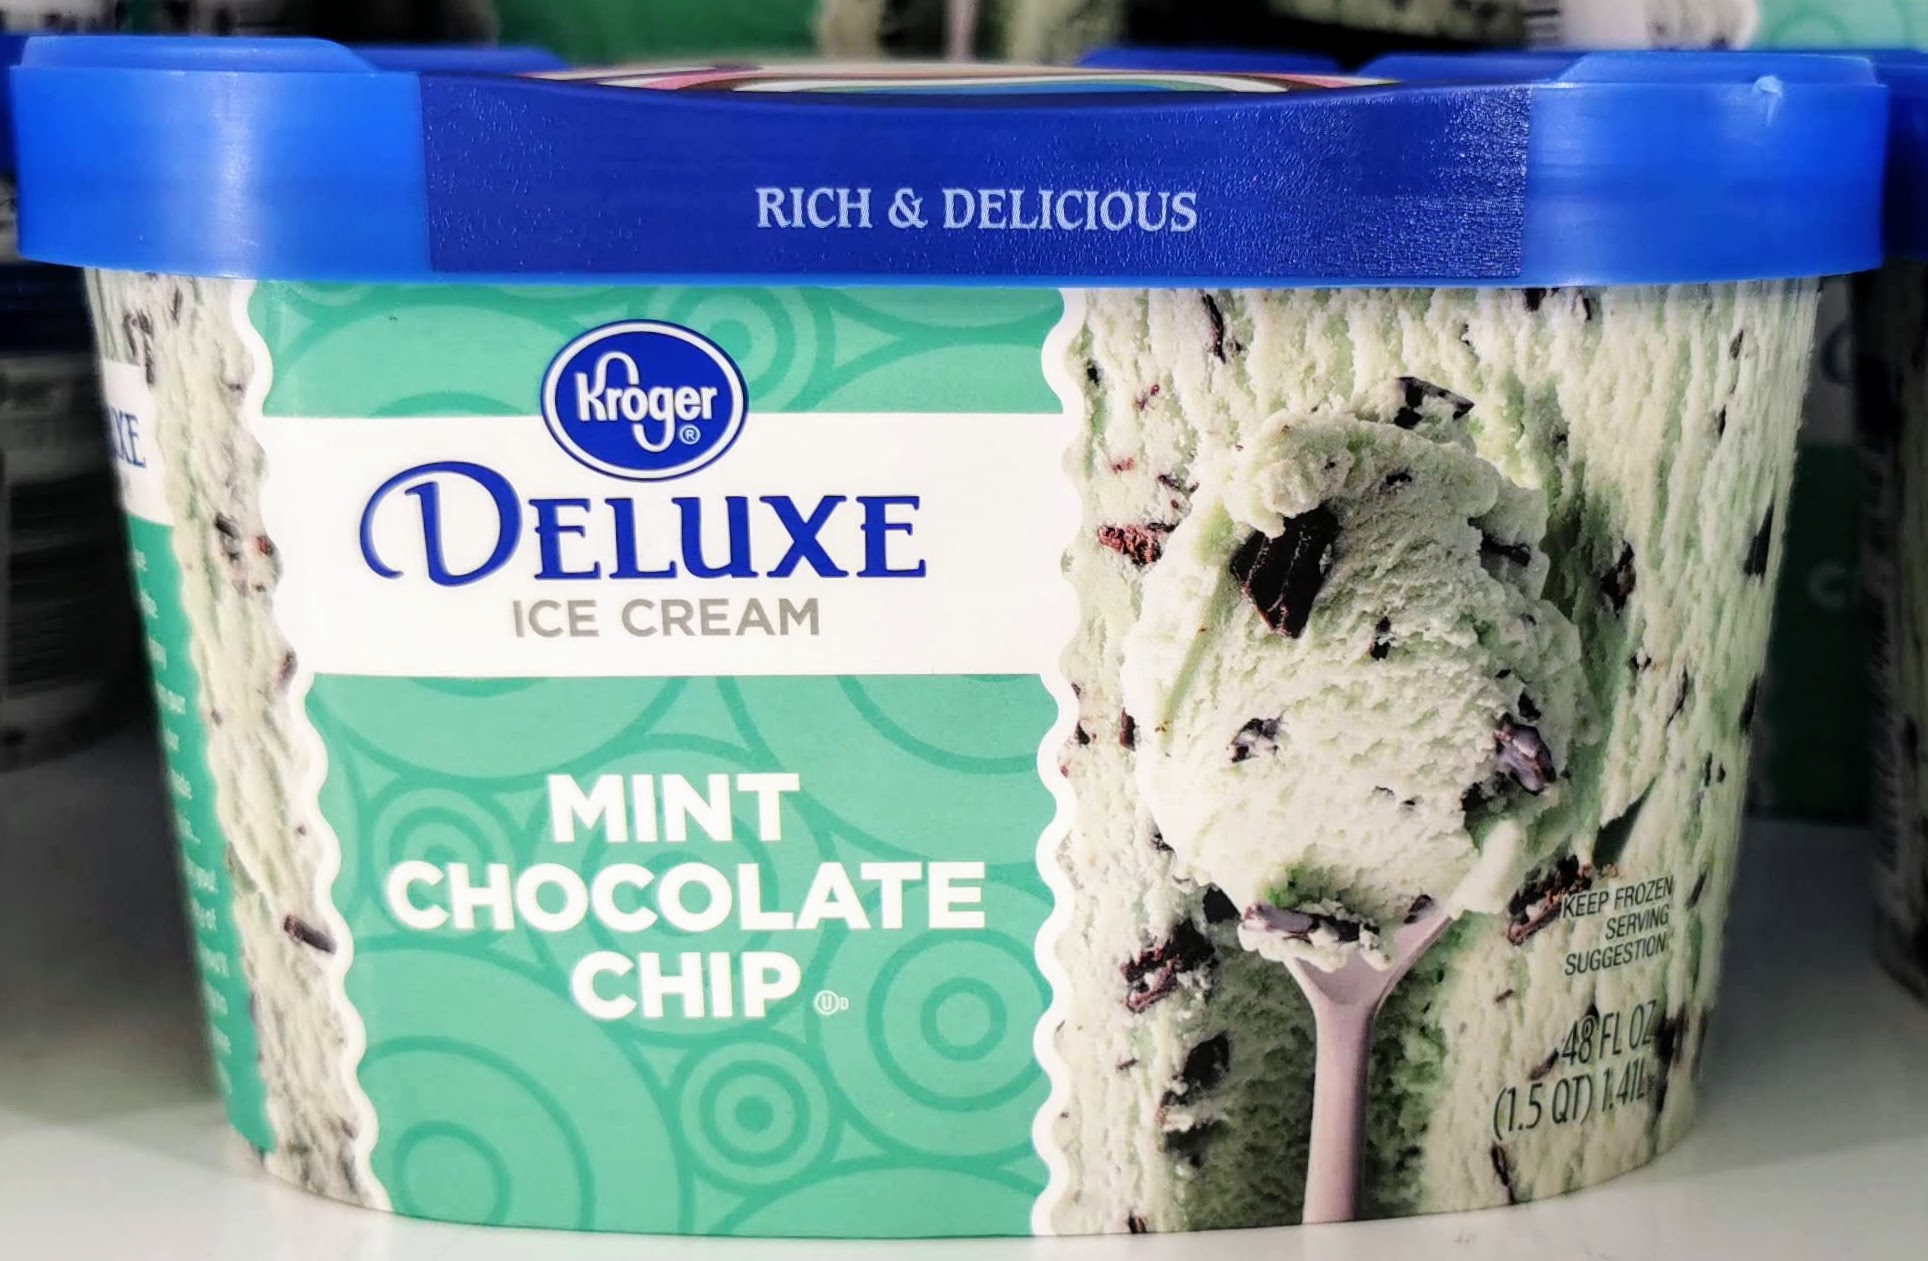 You are currently viewing Kroger Mint Chocolate Chip Ice Cream (Kroger)